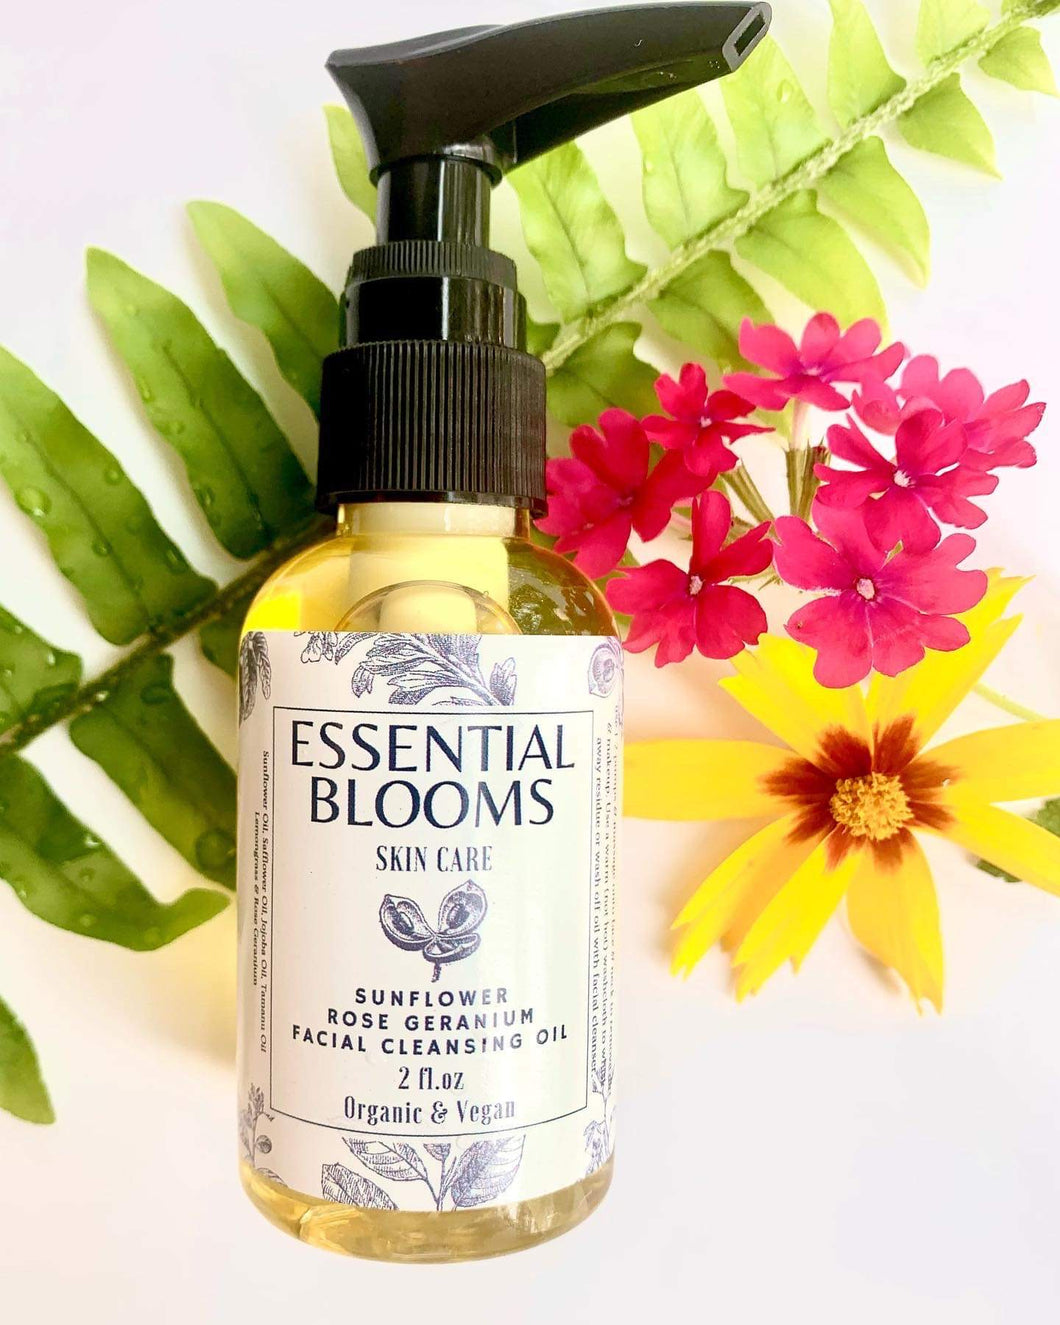 Essential Blooms Facial Cleansing Oil